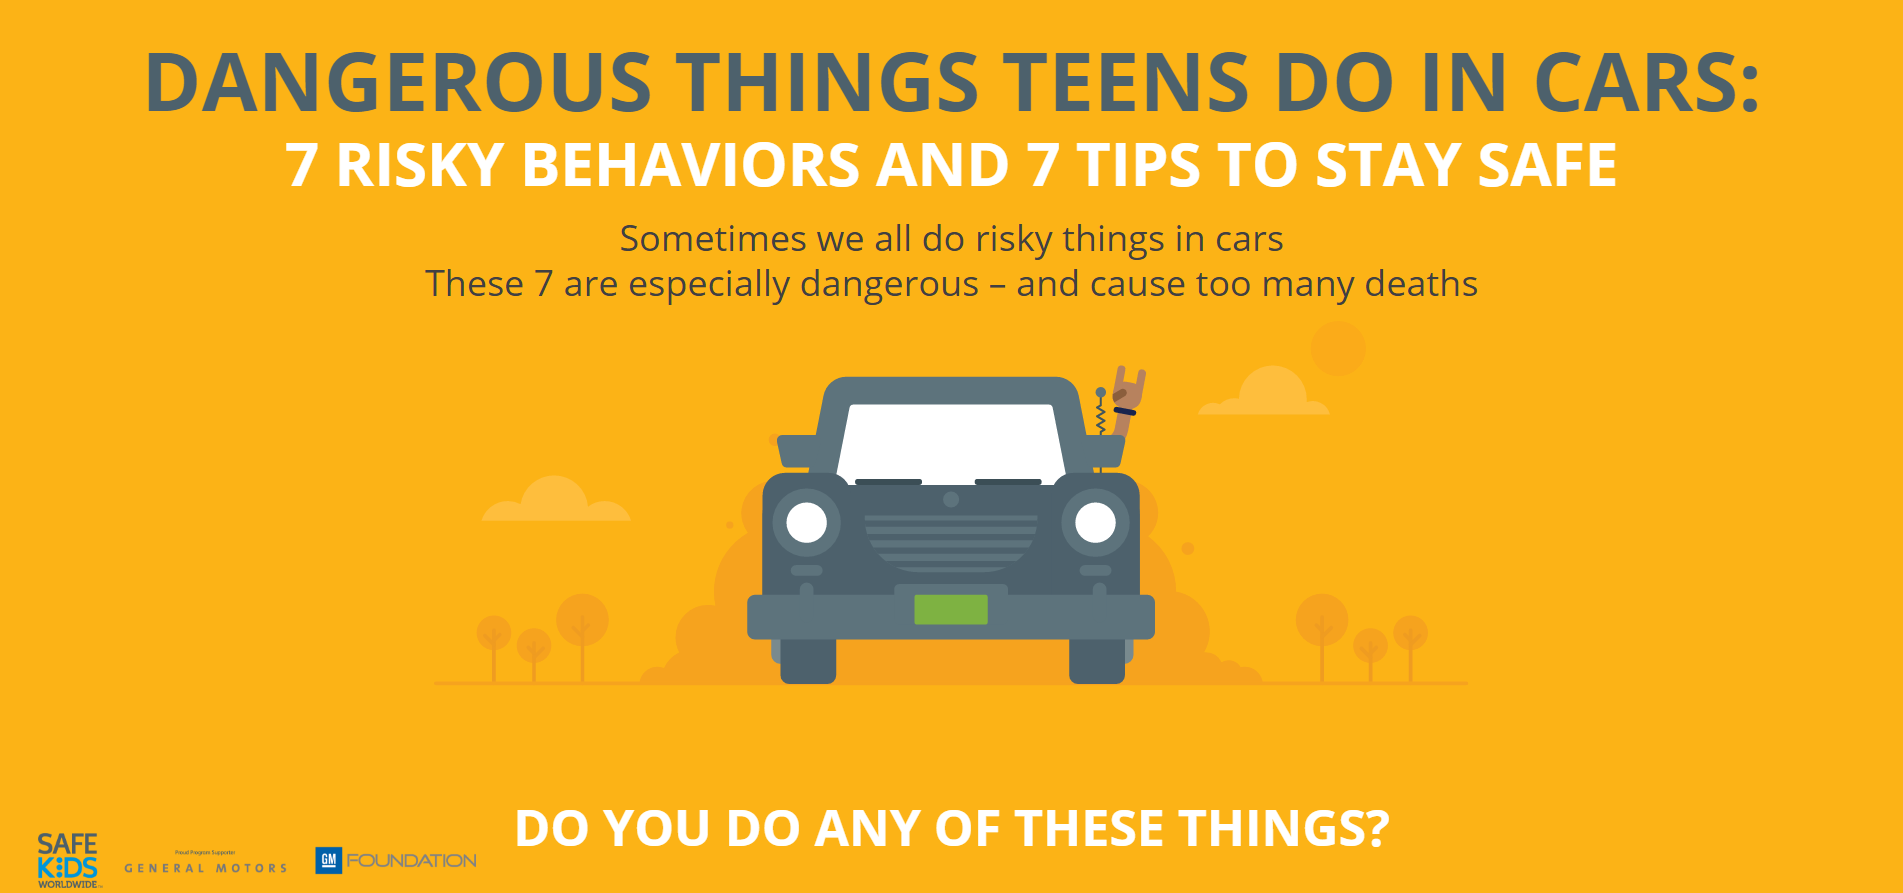 19 Gifts for New Teen Drivers (Help Encourage Responsibility + Safety)